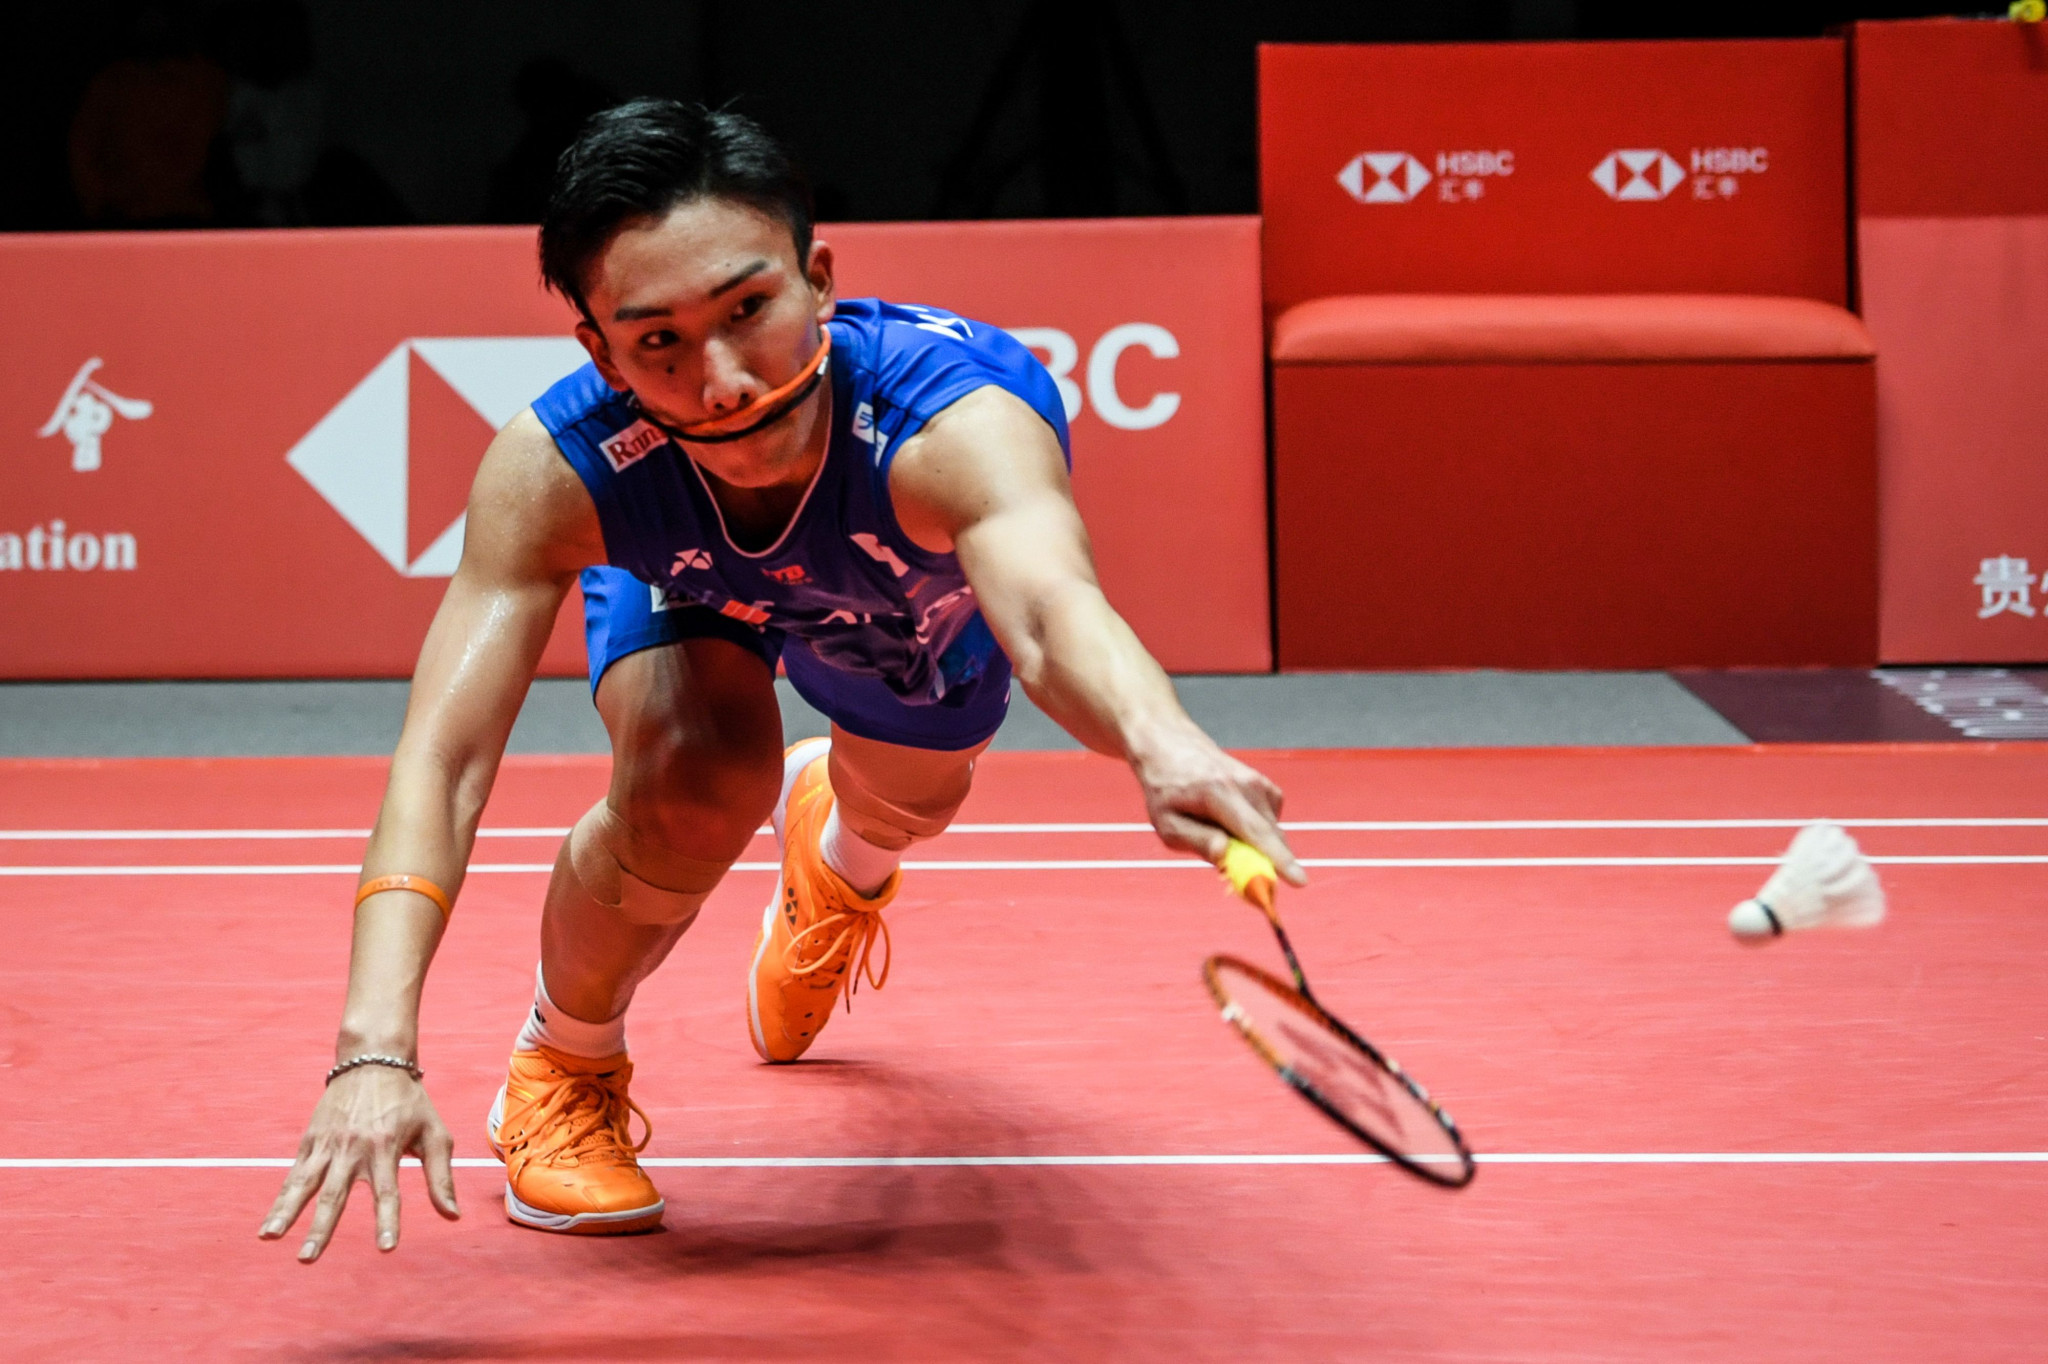 Top seed Momota safely through to quarter-finals at All England Open Badminton Championships